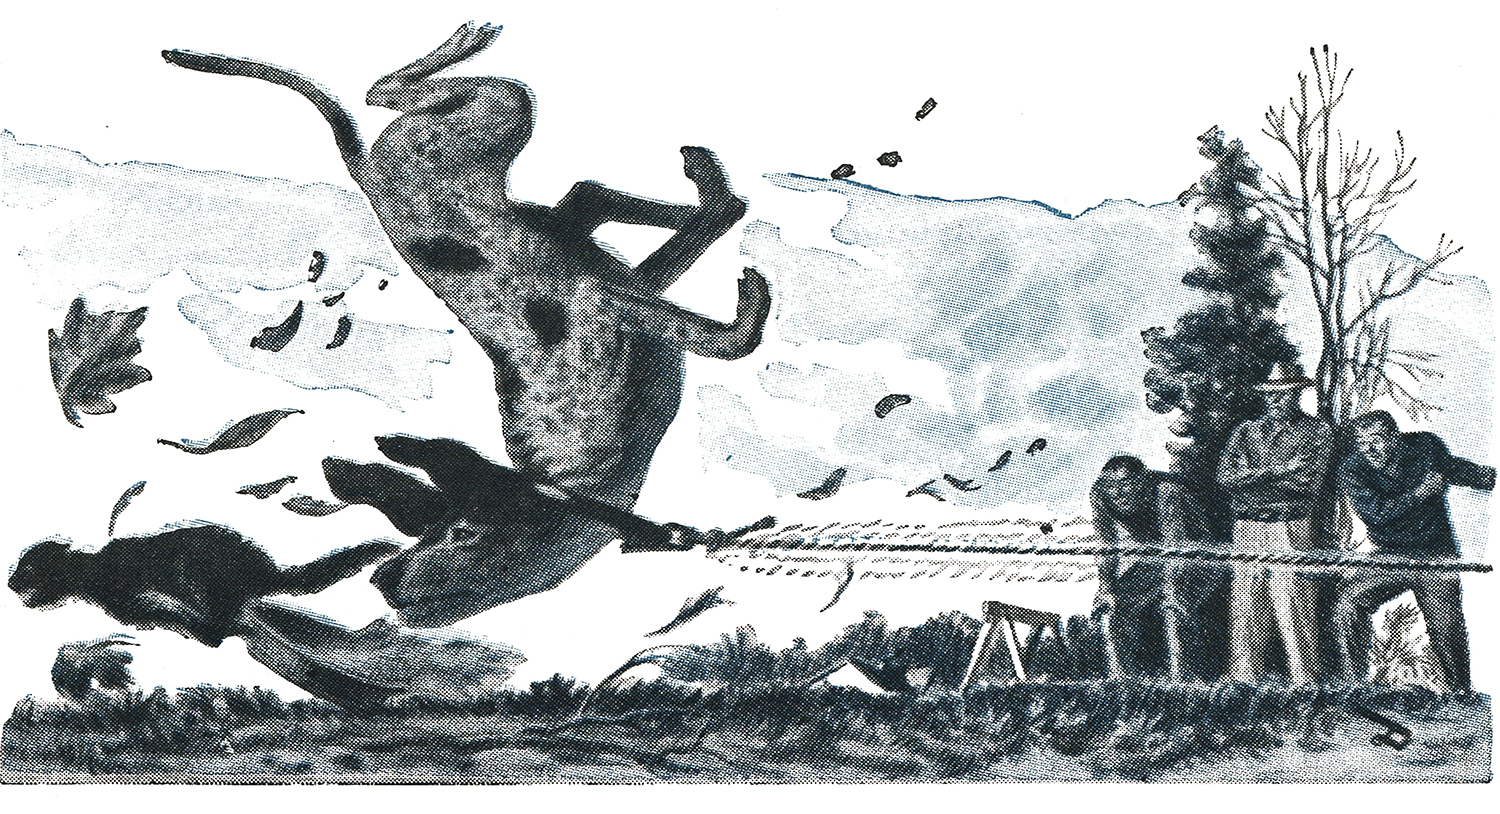 illustration of dog flipping over and chasing cat